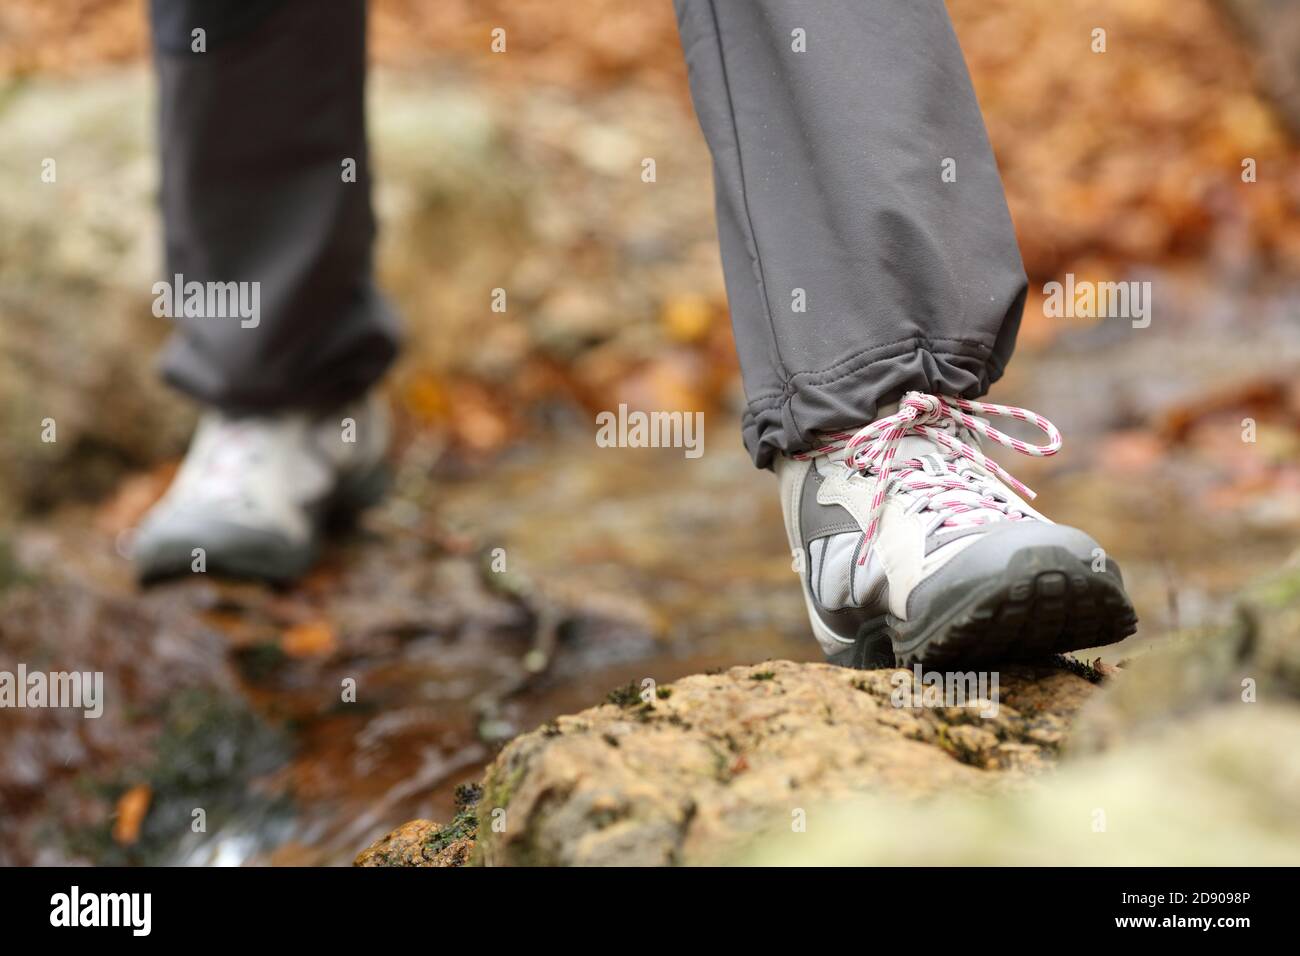 Close up of a trekker legs wearing trekking boots crossing a creek in autumn in a forest Stock Photo